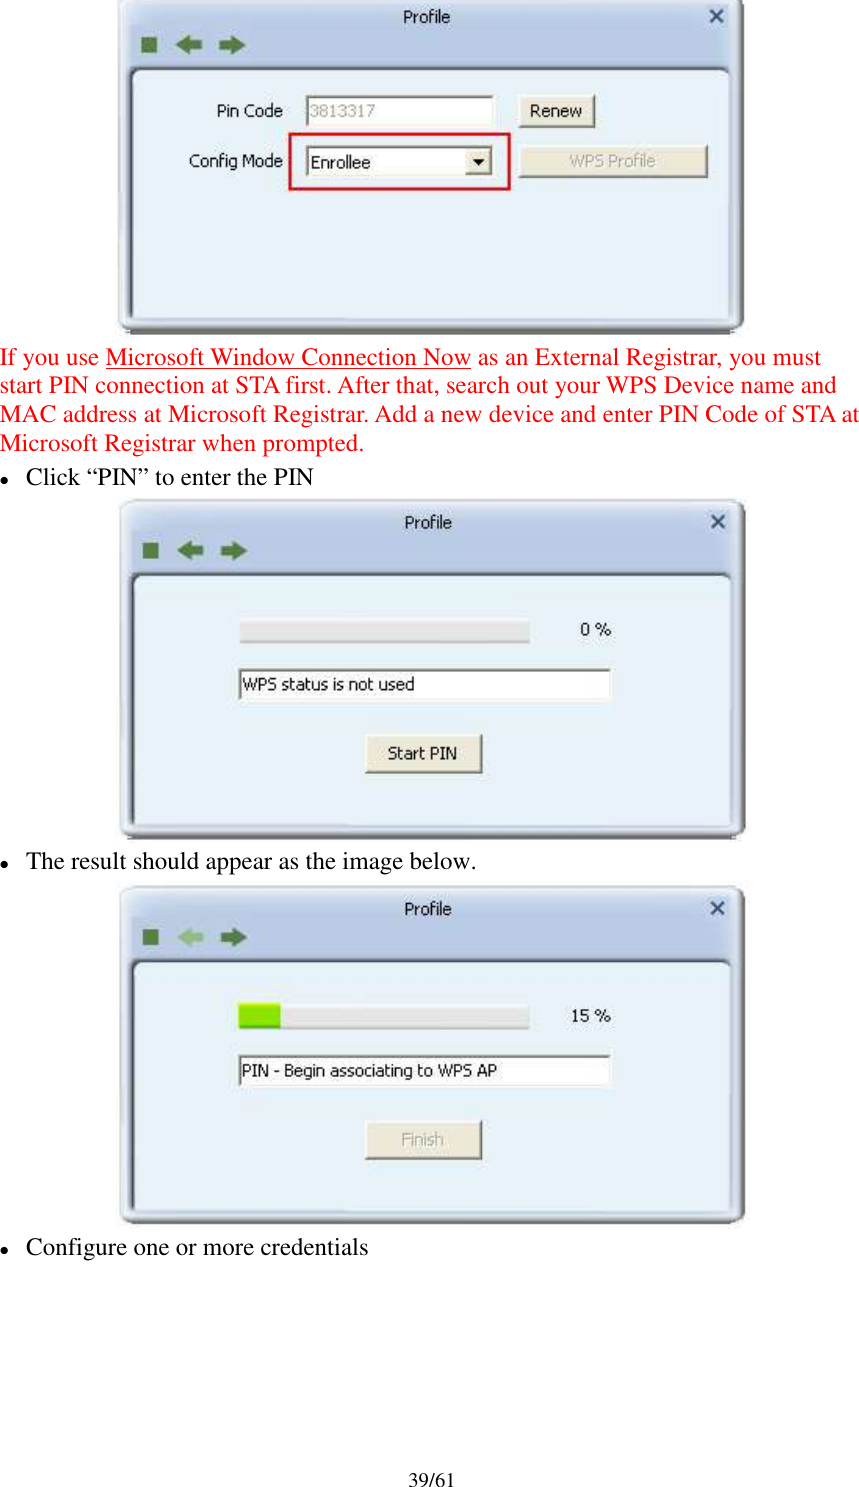 39/61If you use Microsoft Window Connection Now as an External Registrar, you muststart PIN connection at STA first. After that, search out your WPS Device name andMAC address at Microsoft Registrar. Add a new device and enter PIN Code of STA atMicrosoft Registrar when prompted.Click “PIN” to enter the PINThe result should appear as the image below.Configure one or more credentials